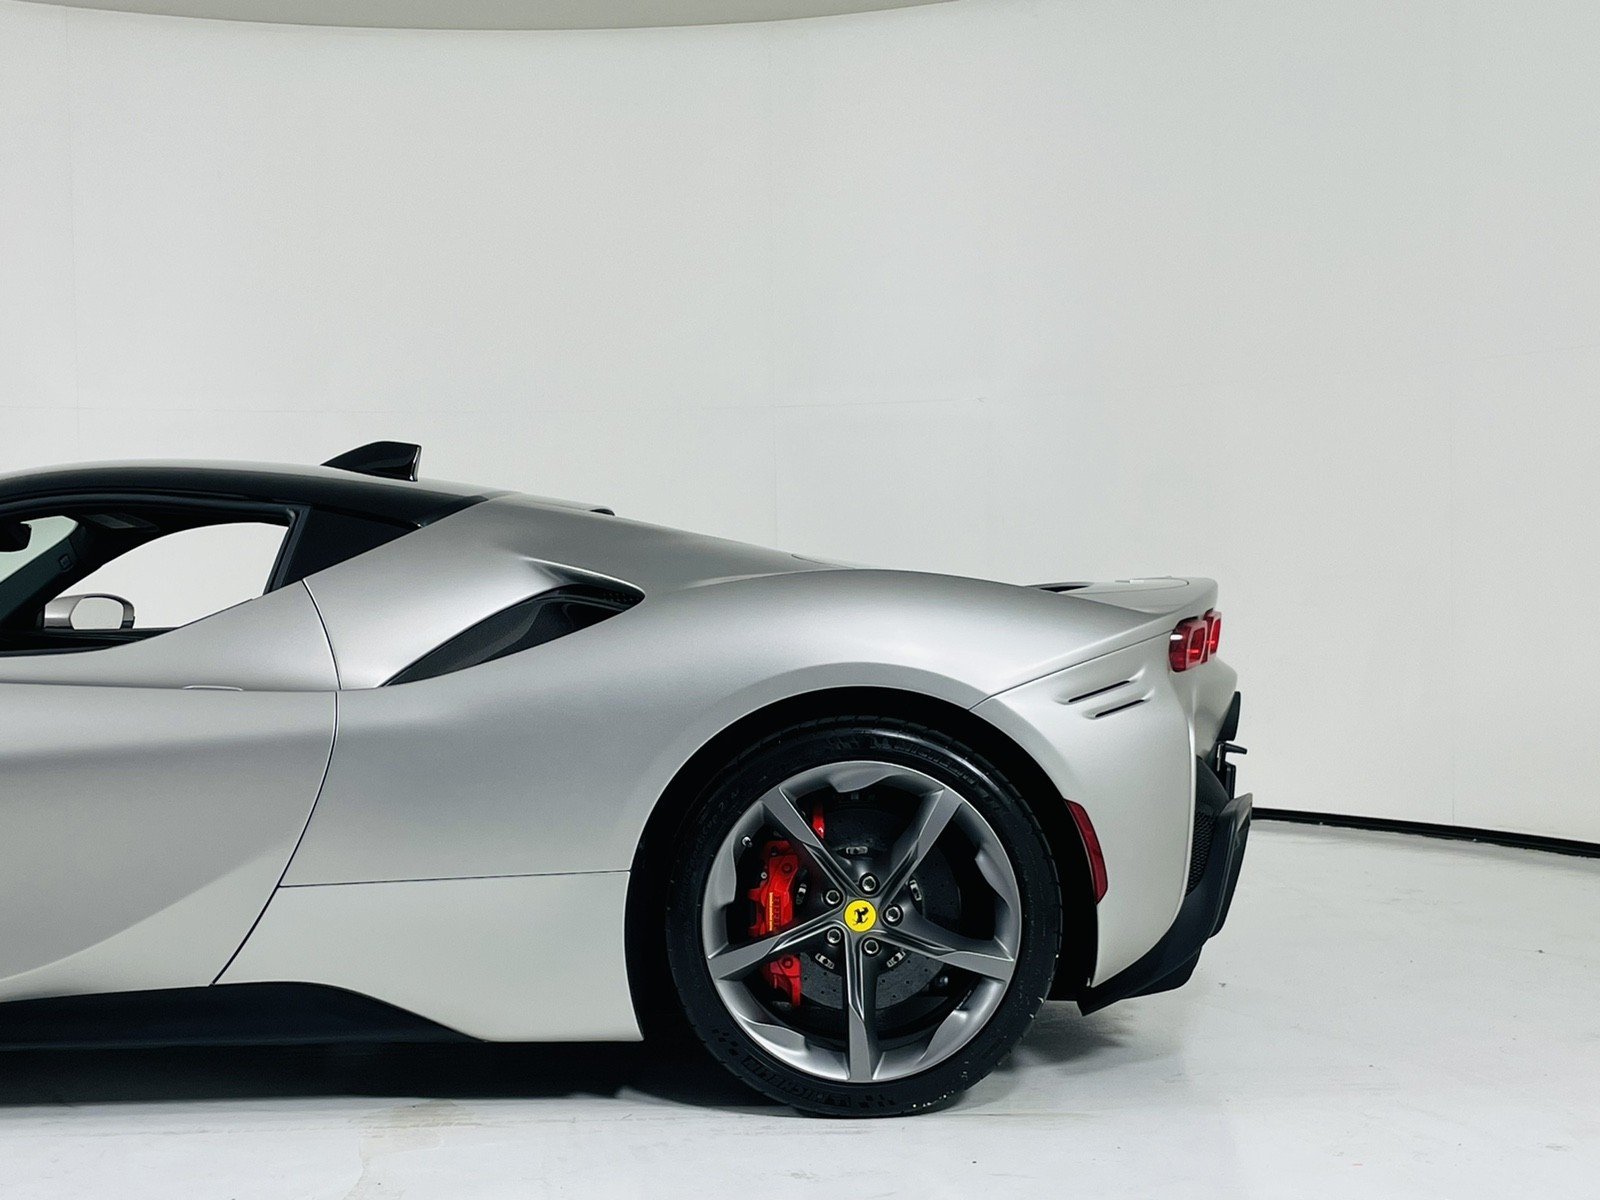 USED 2021 FERRARI SF90 STRADALE COUPE W A 650K MSRP FOR SALE (33)